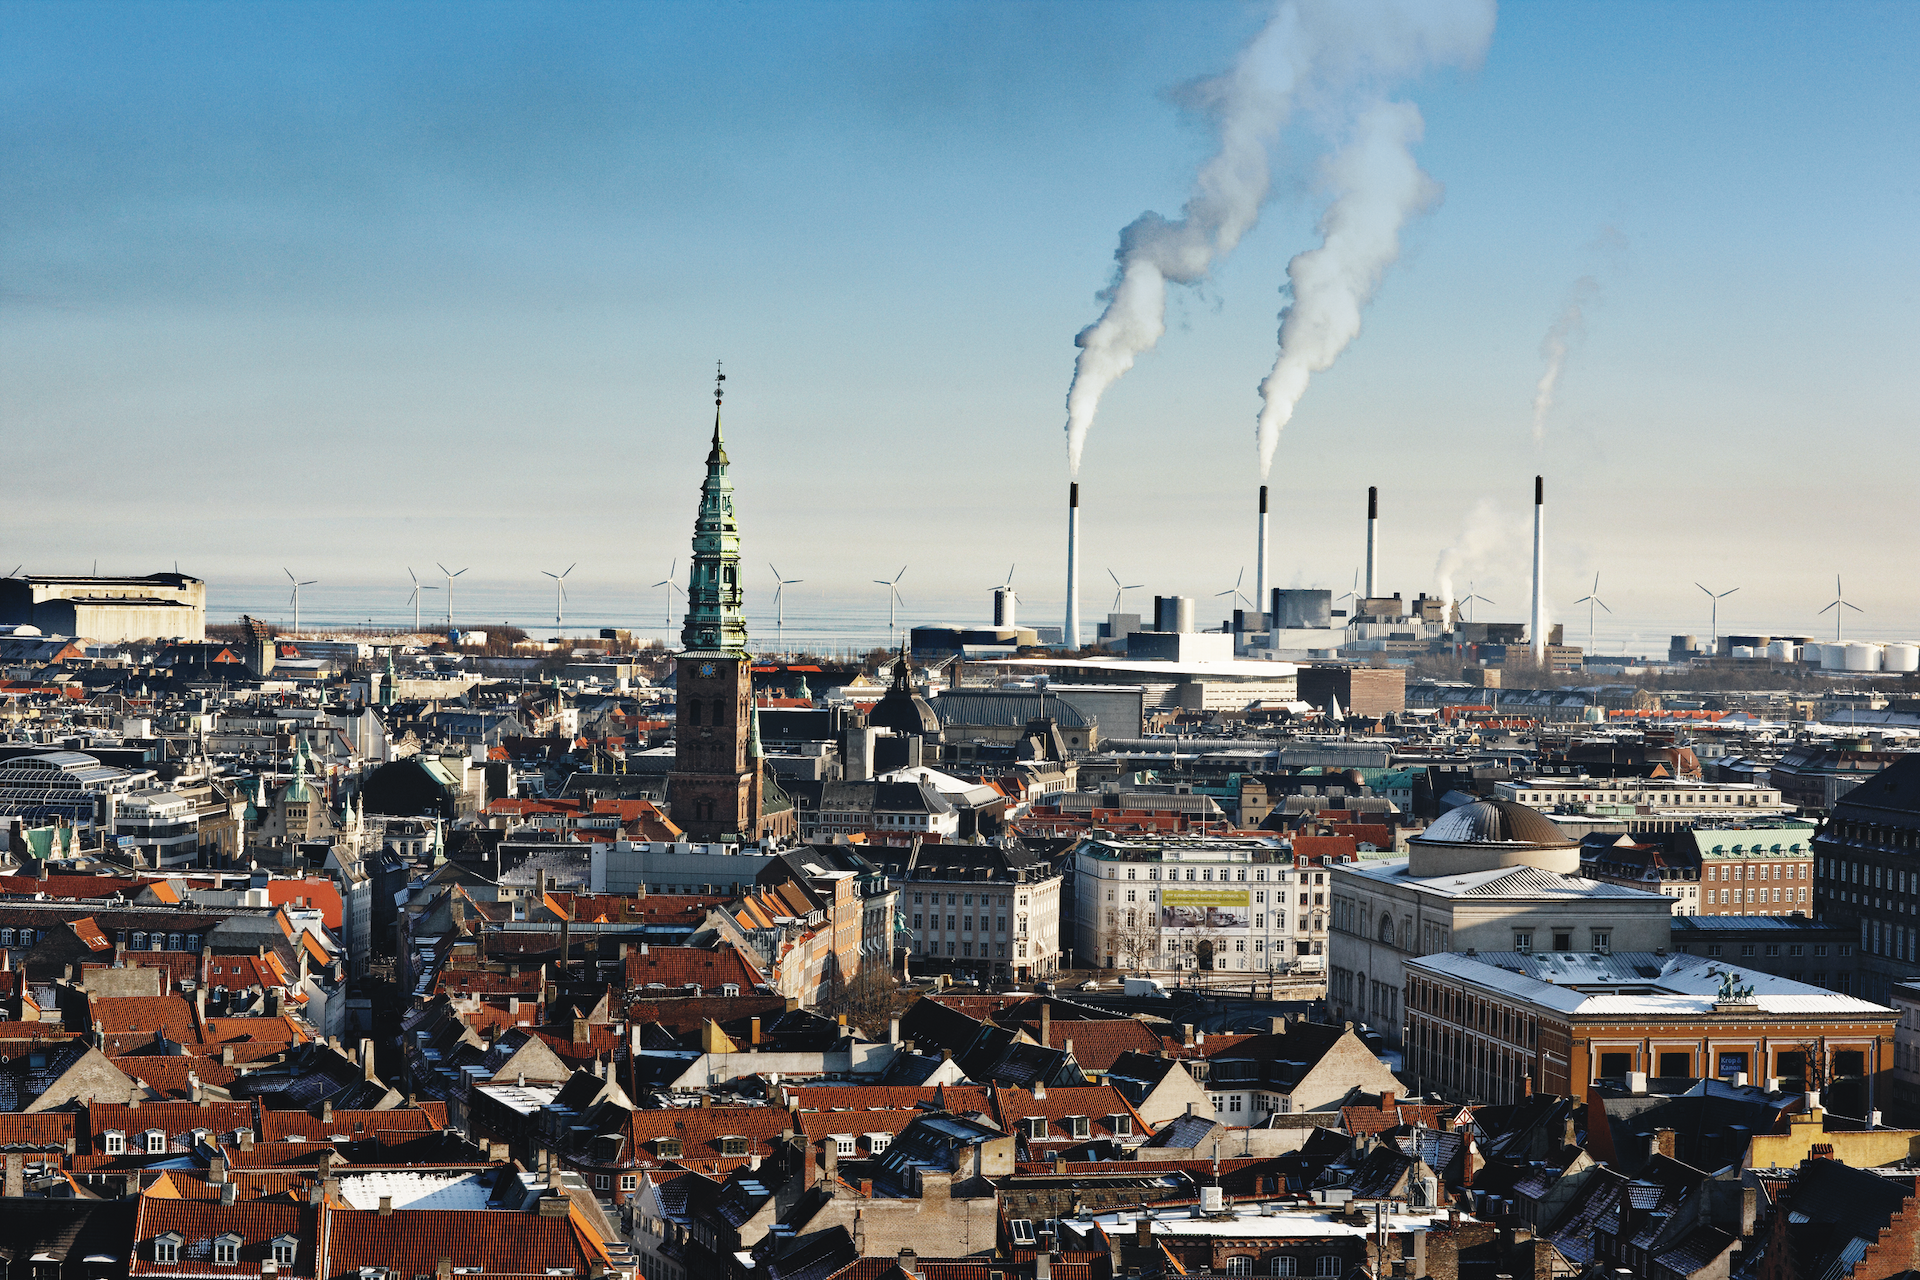 Arial view of Copenhagen with red roofs and iconic historic buildings